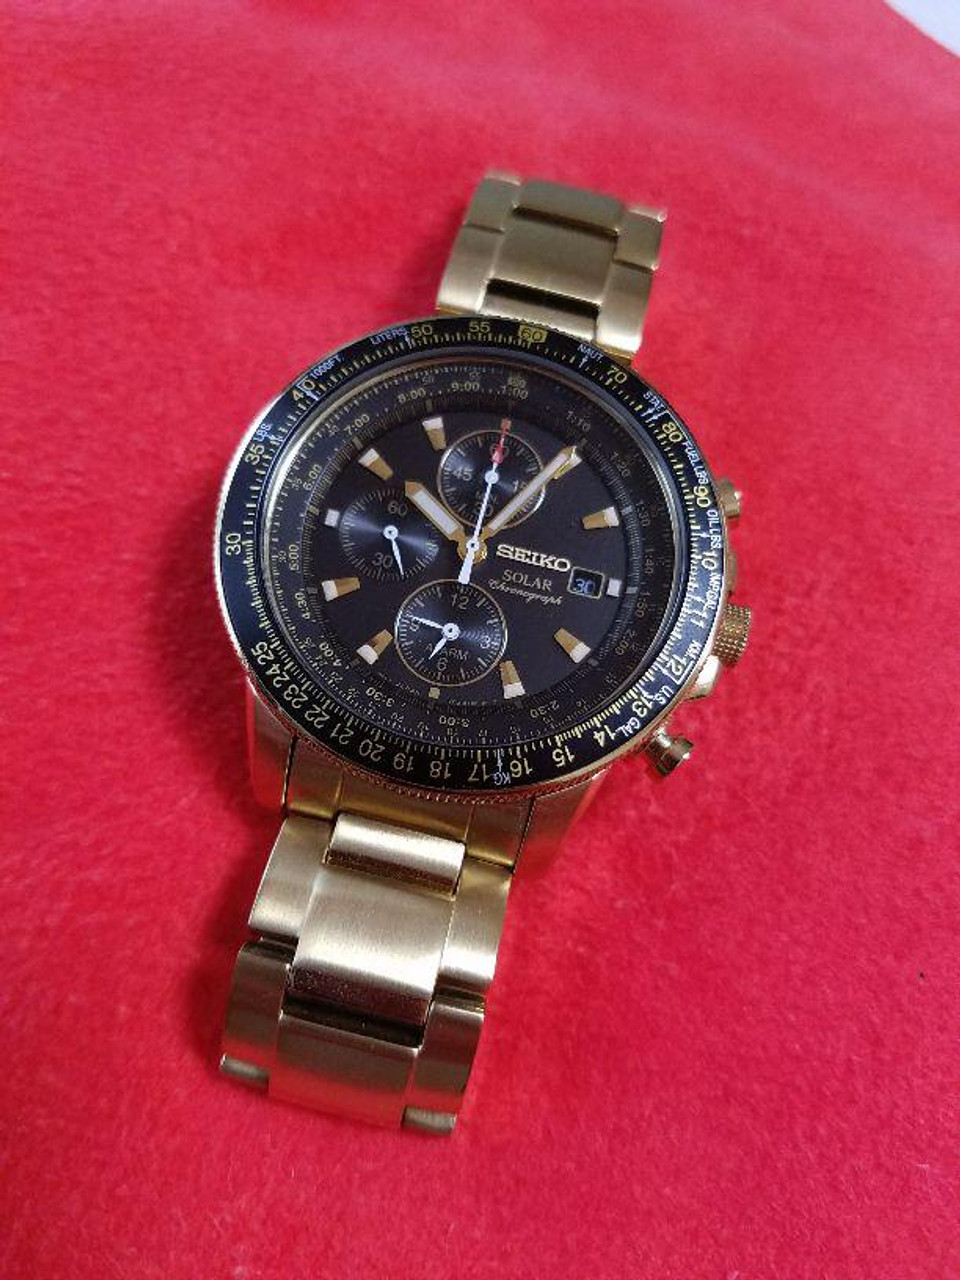 Seiko Chronograph Date Pilot Gold Solar Mens Watch Authentic Working -  Japan Pre-owned Vintage